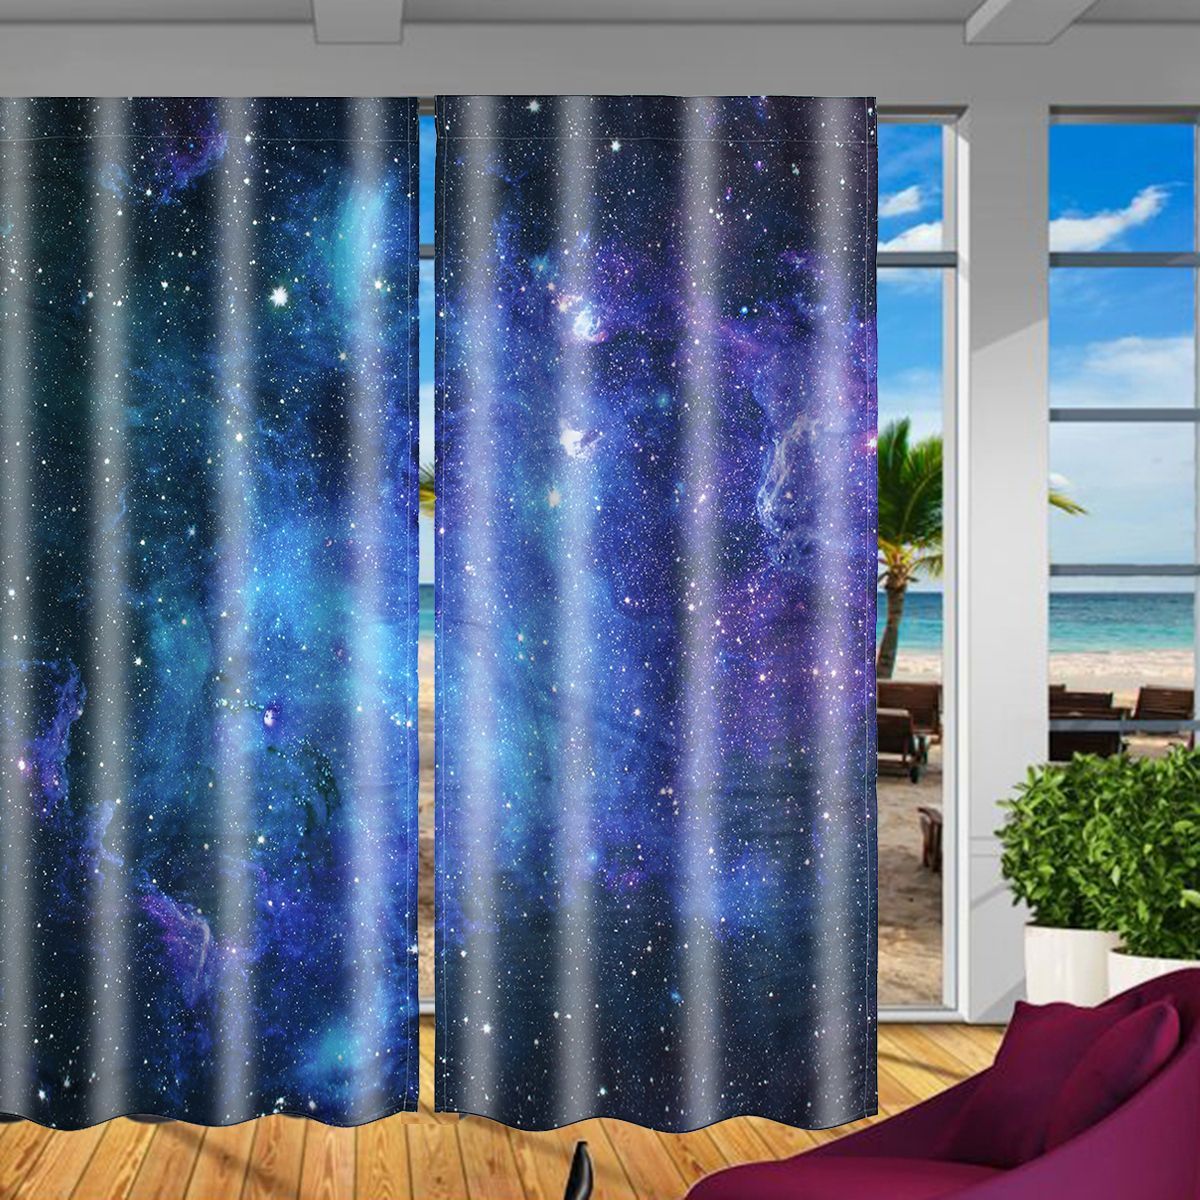 2-Panel-Blackout-Blinds-Thermal-Insulated-3D-Printed-Galaxy-Window-Curtains-Screens-1542466